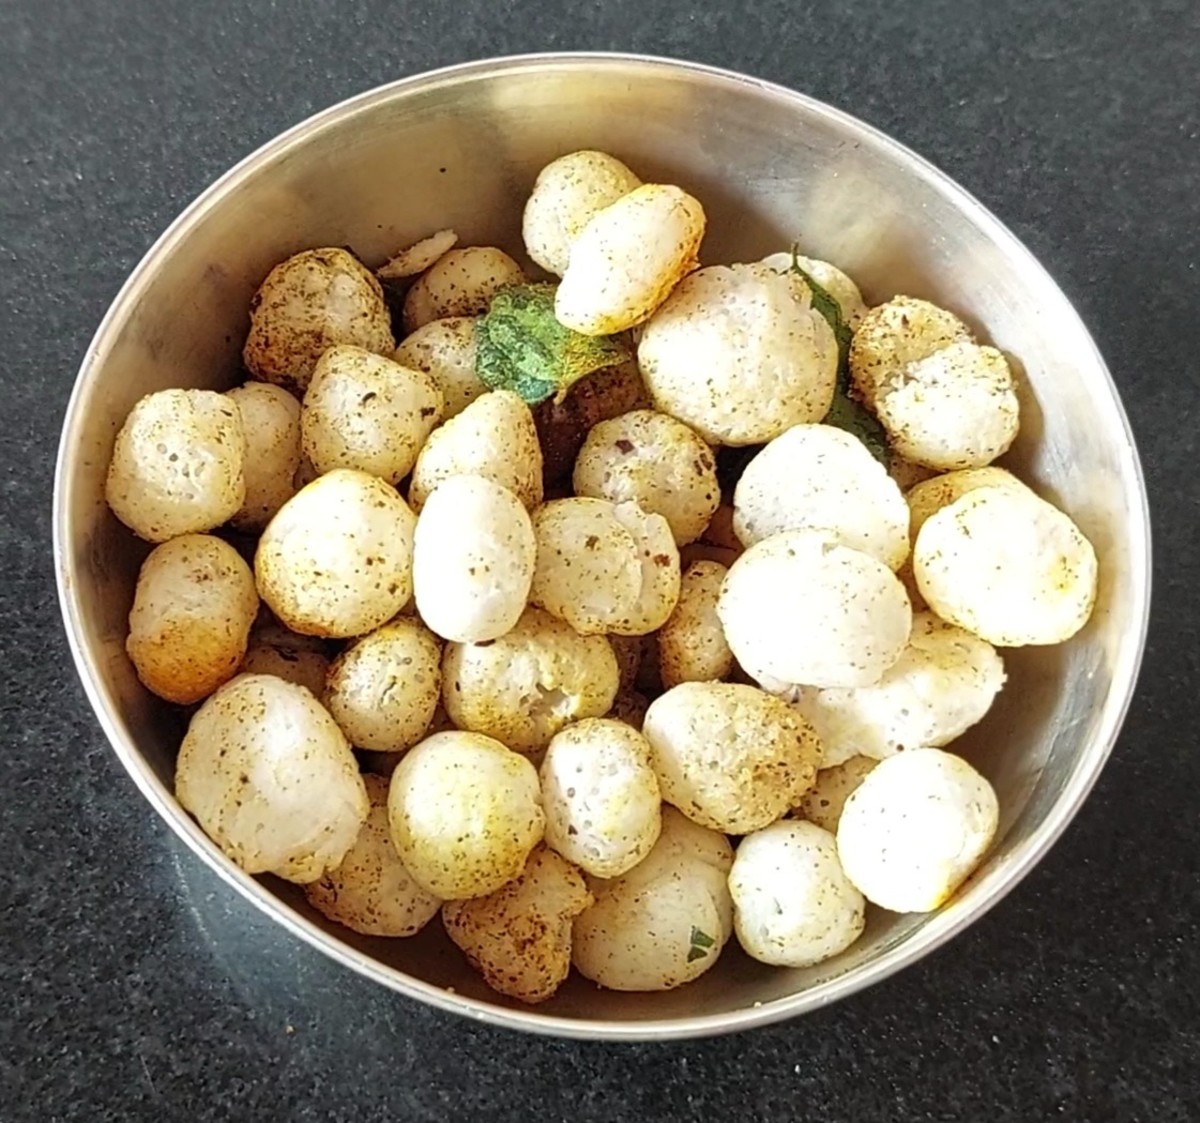 Spicy, crispy and tasty lotus seeds chiwda is ready to serve.